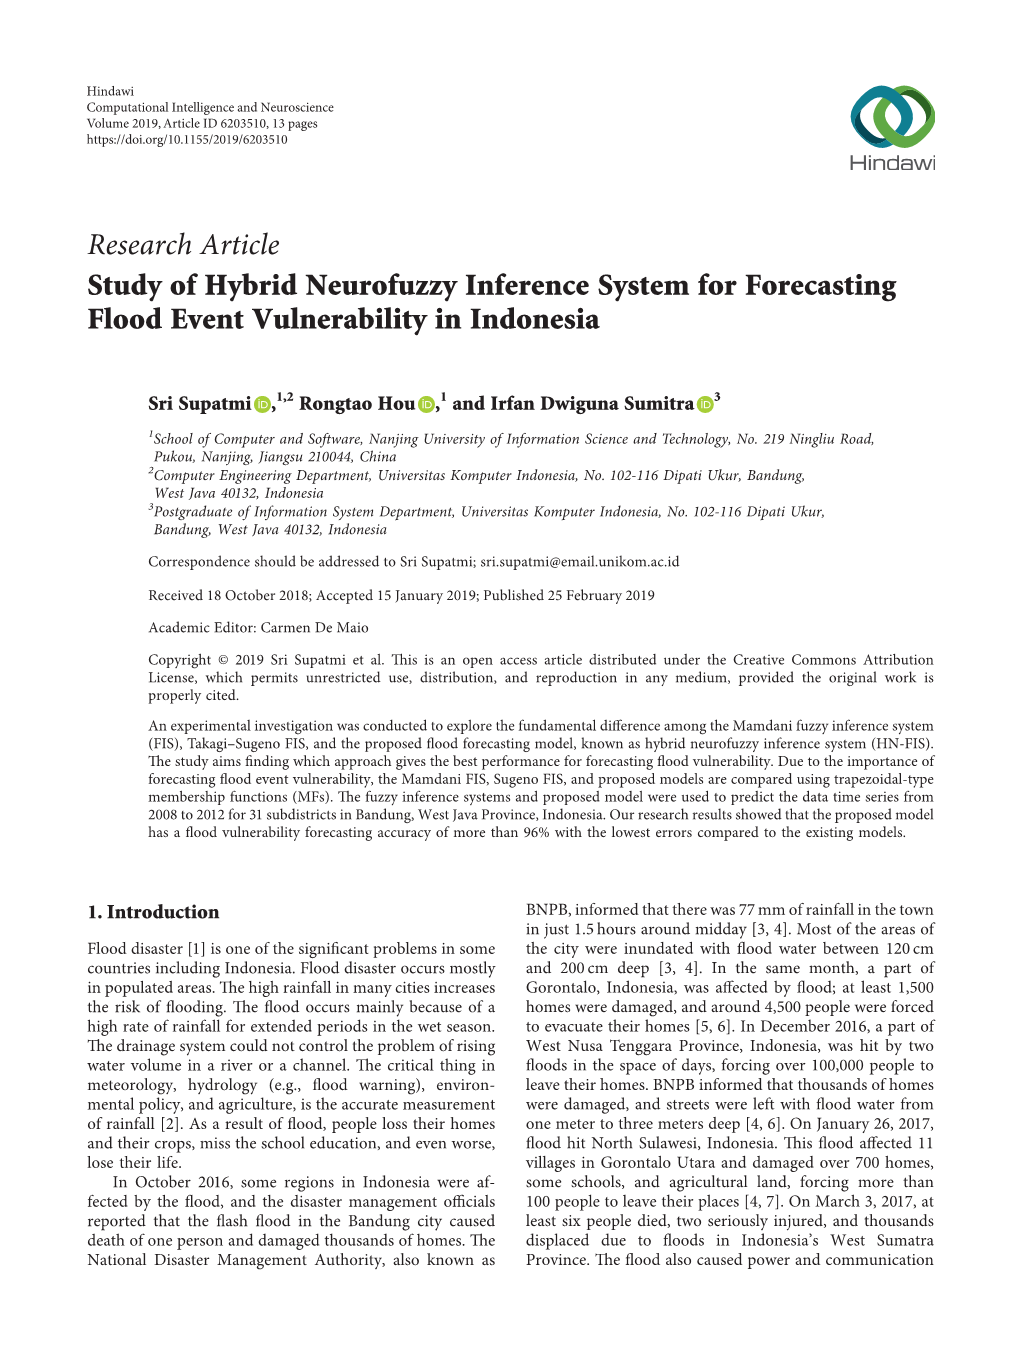 Research Article Study of Hybrid Neurofuzzy Inference System for Forecasting Flood Event Vulnerability in Indonesia